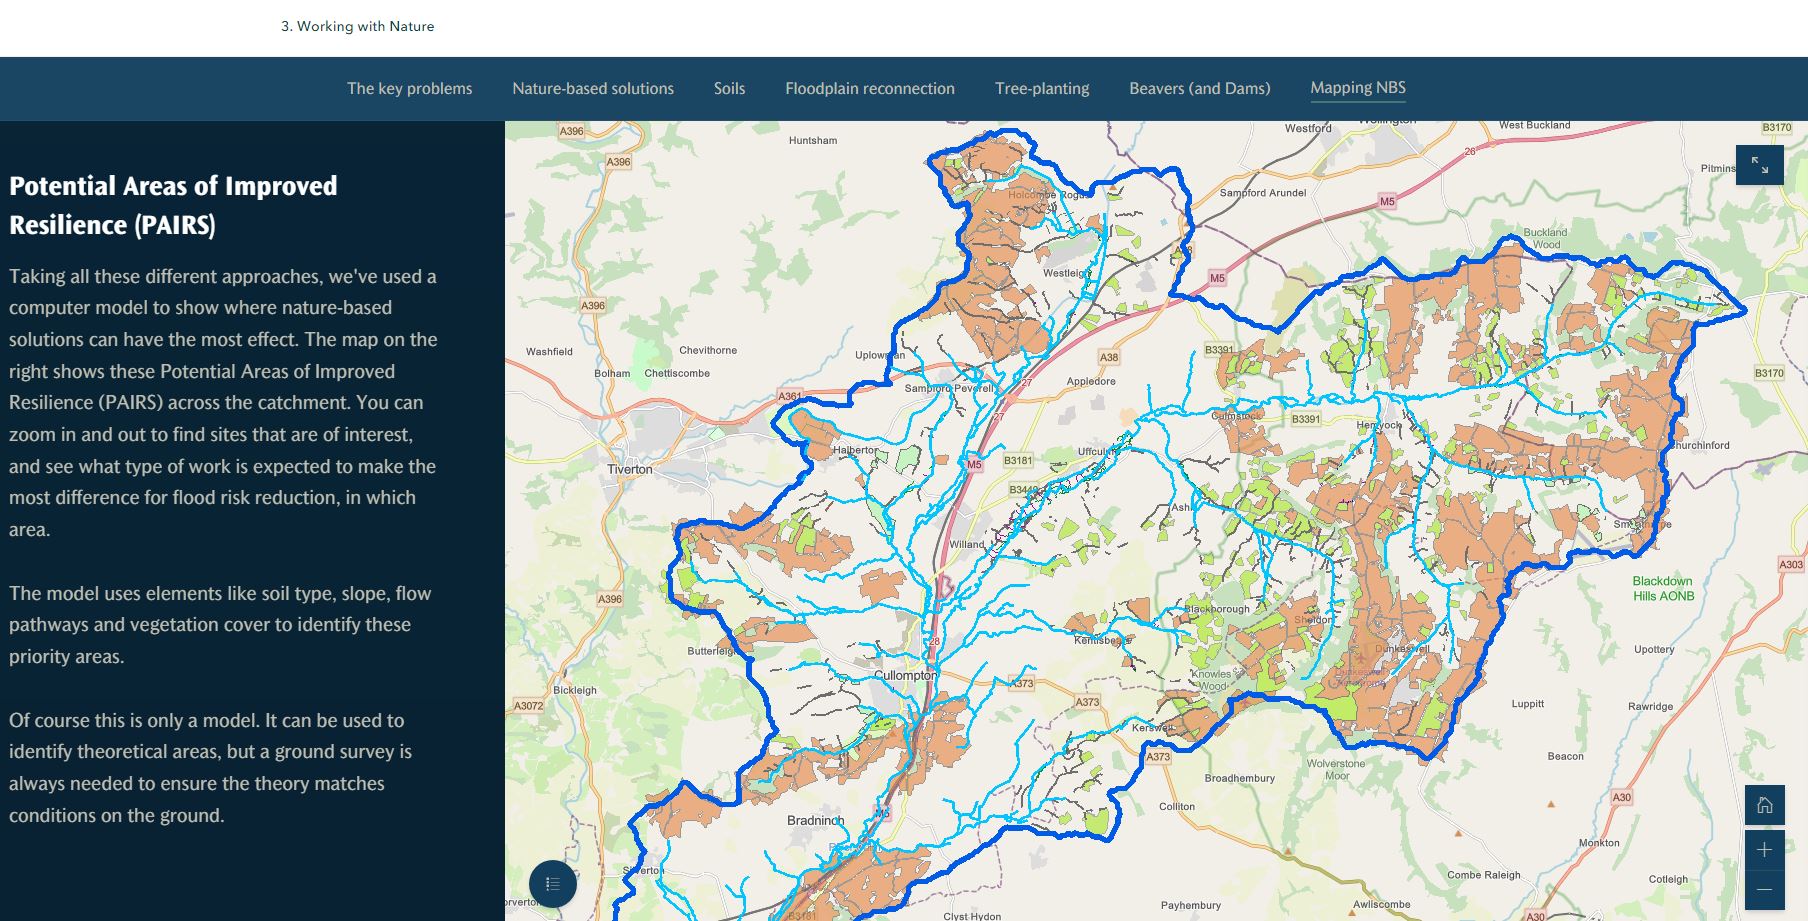 PAIRS map - Potential Areas of Improved Resilience in the River Culm Catchment